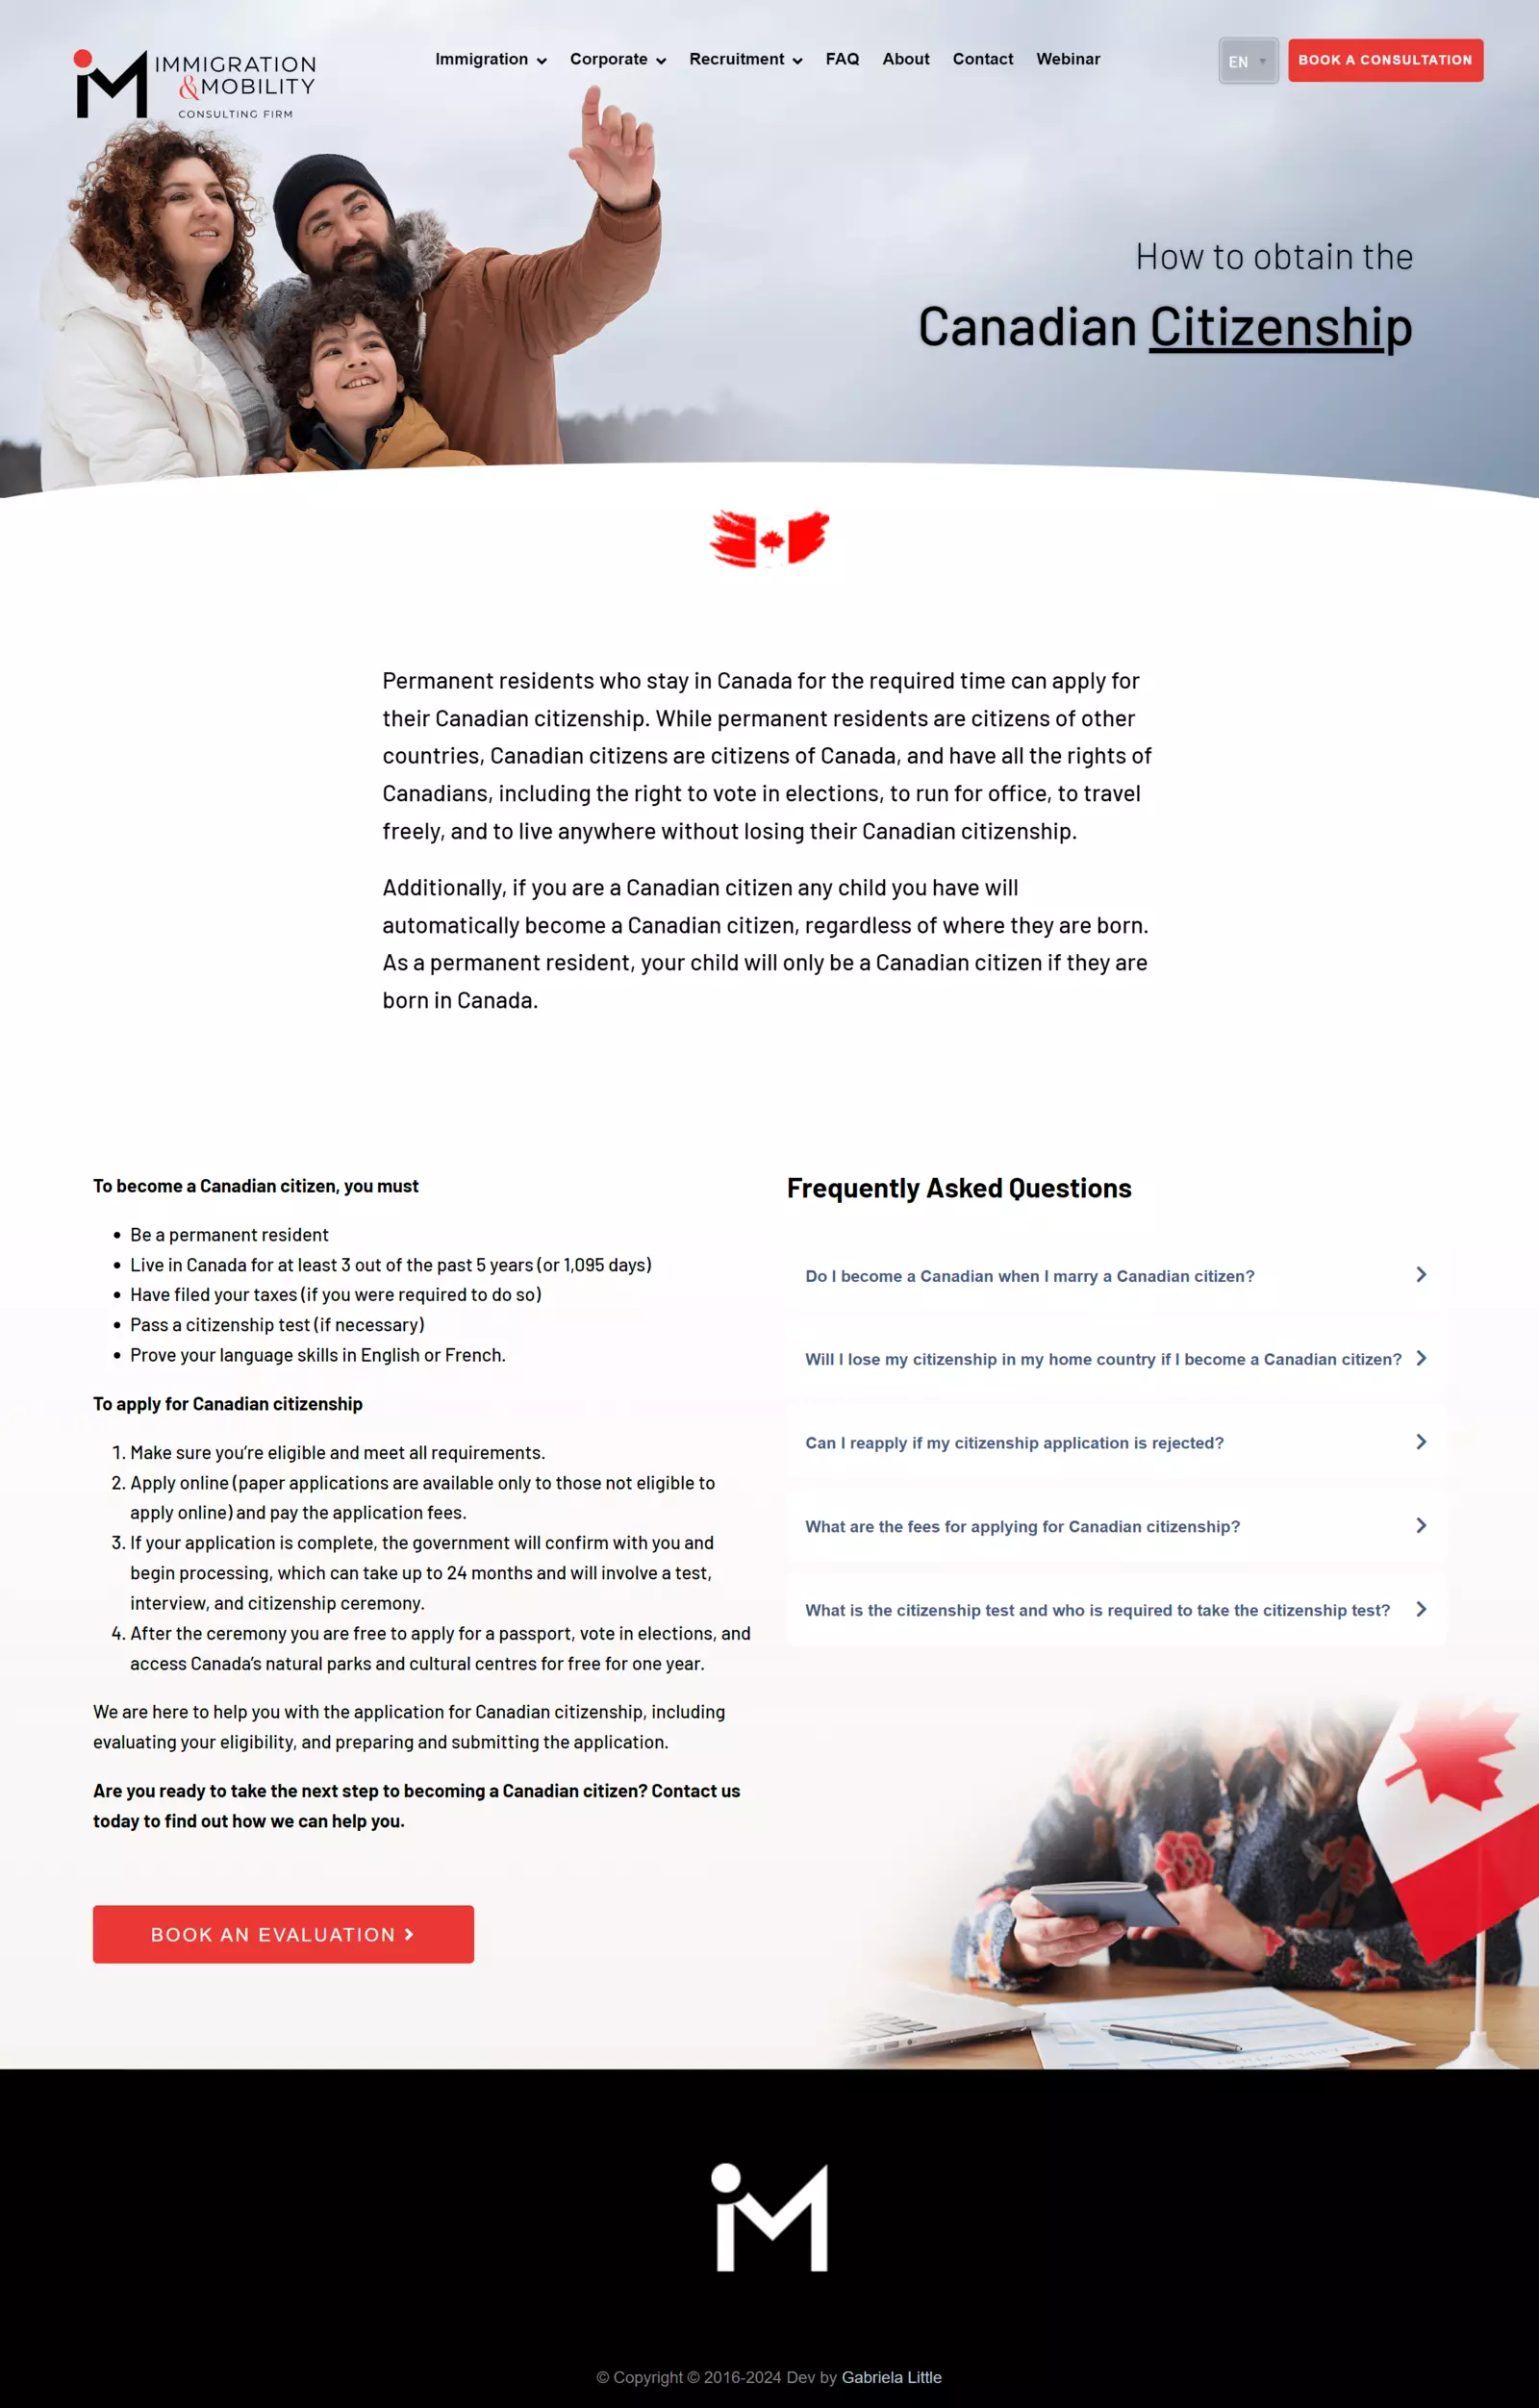 Image of full intern page IMMC website about citizenship